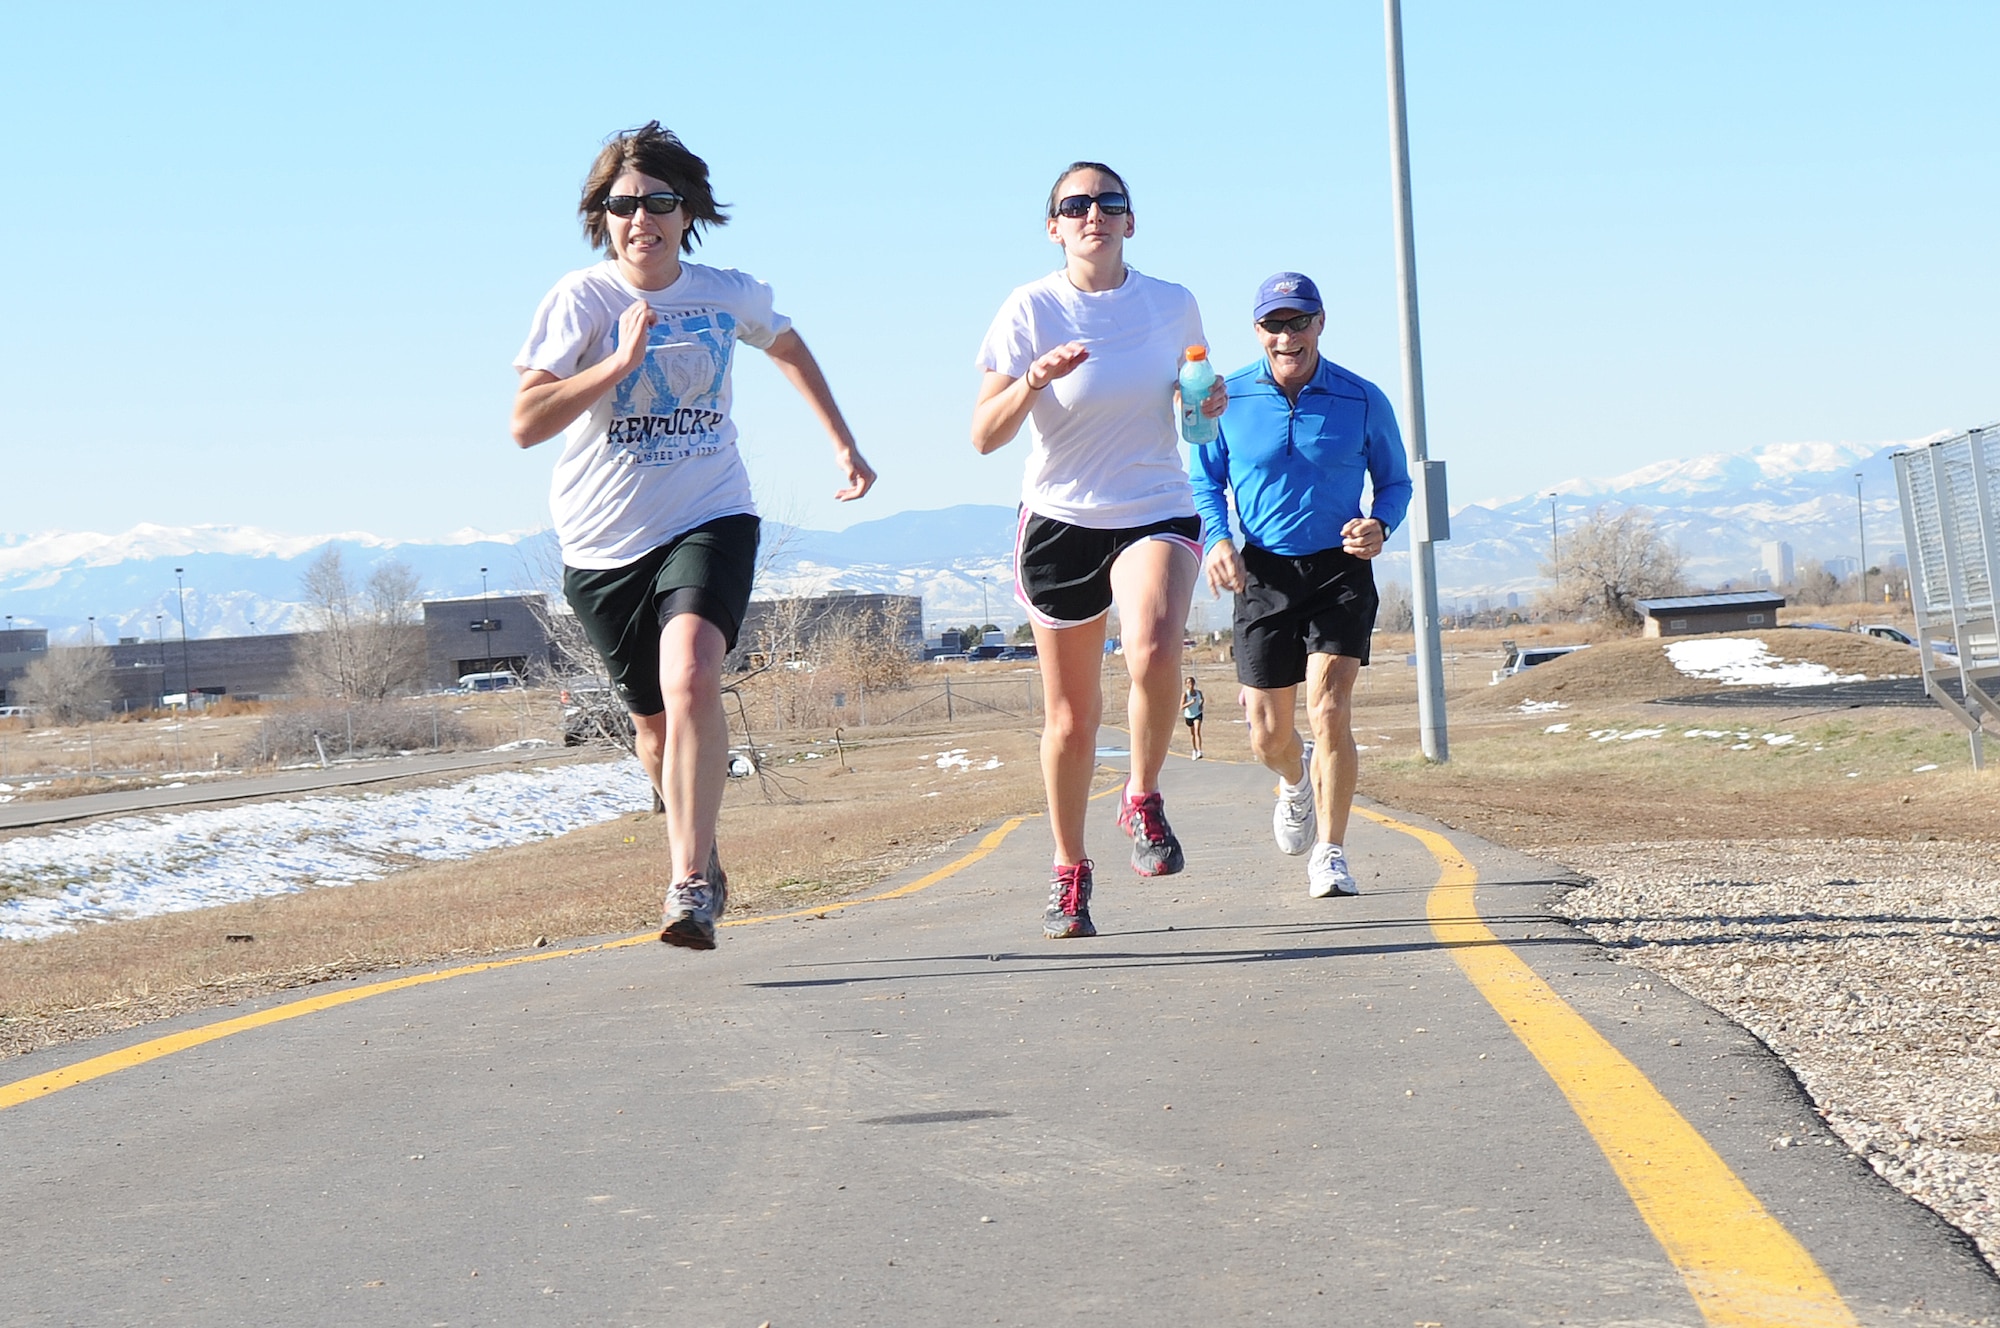 BUCKLEY AIR FORCE BASE, Colo. -- Team Buckley runners speed toward the finish line during the annual Turkey Trot Nov. 18. The Turkey Trot promotes fitness and camraderie during the holiday season. (U.S. Air Force photo by Airman First Class Marcy Glass)